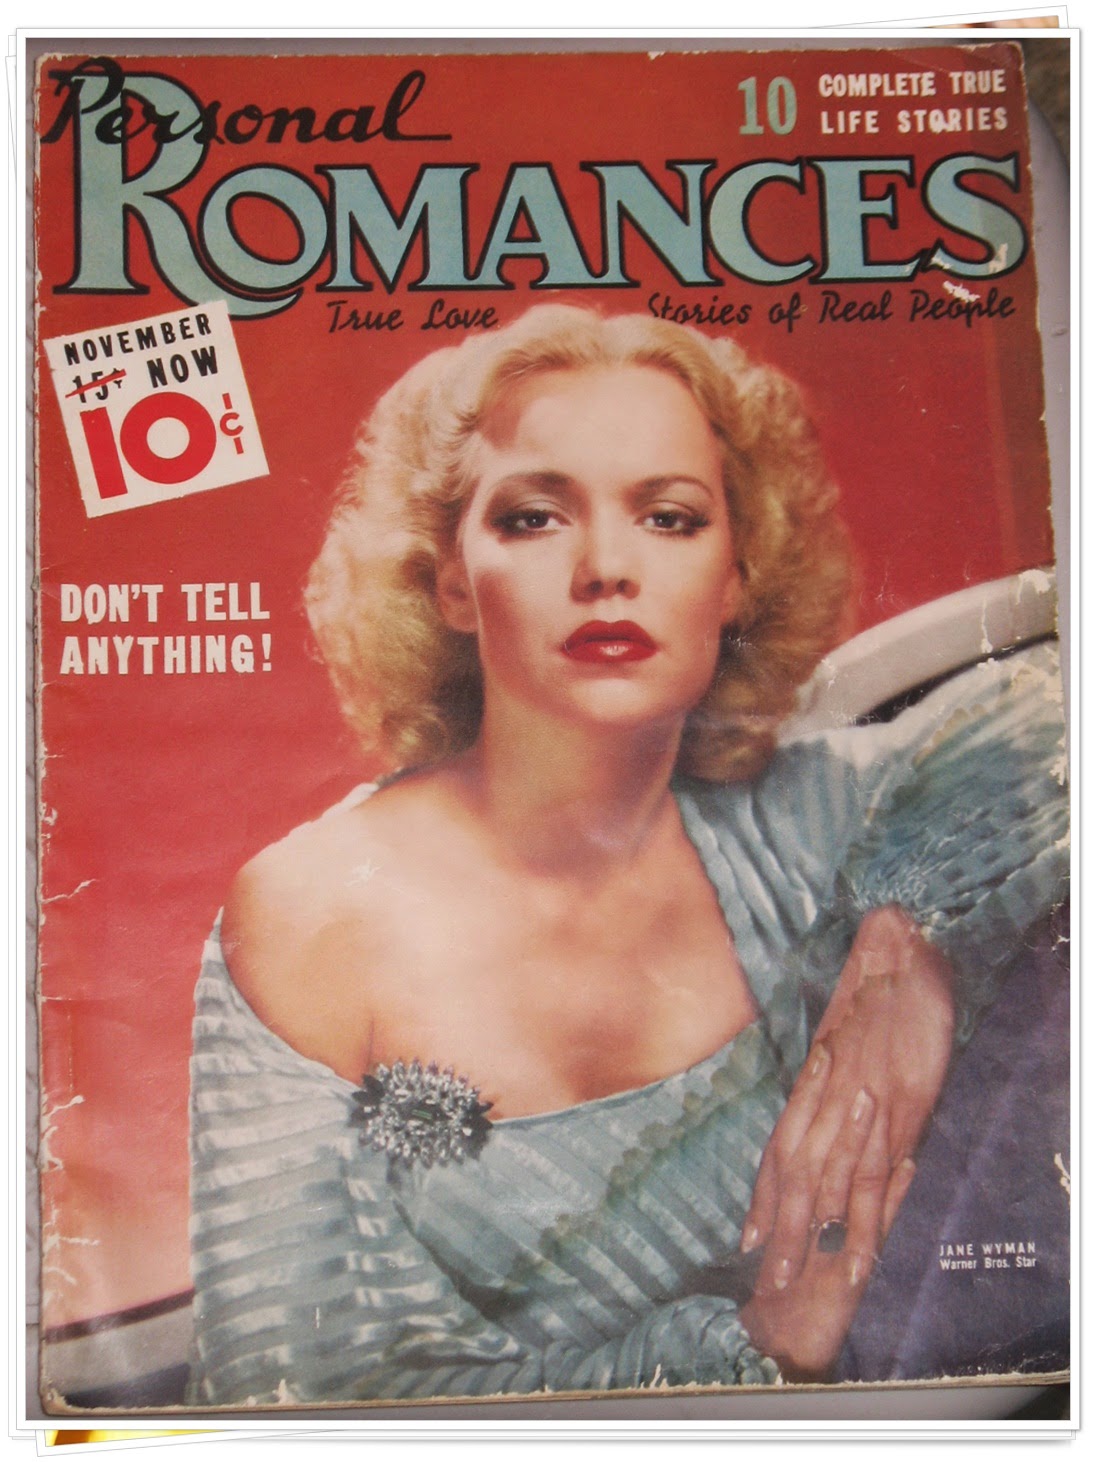 A very young Jane Wyman as Covergirl on Personal Romances dated 1939